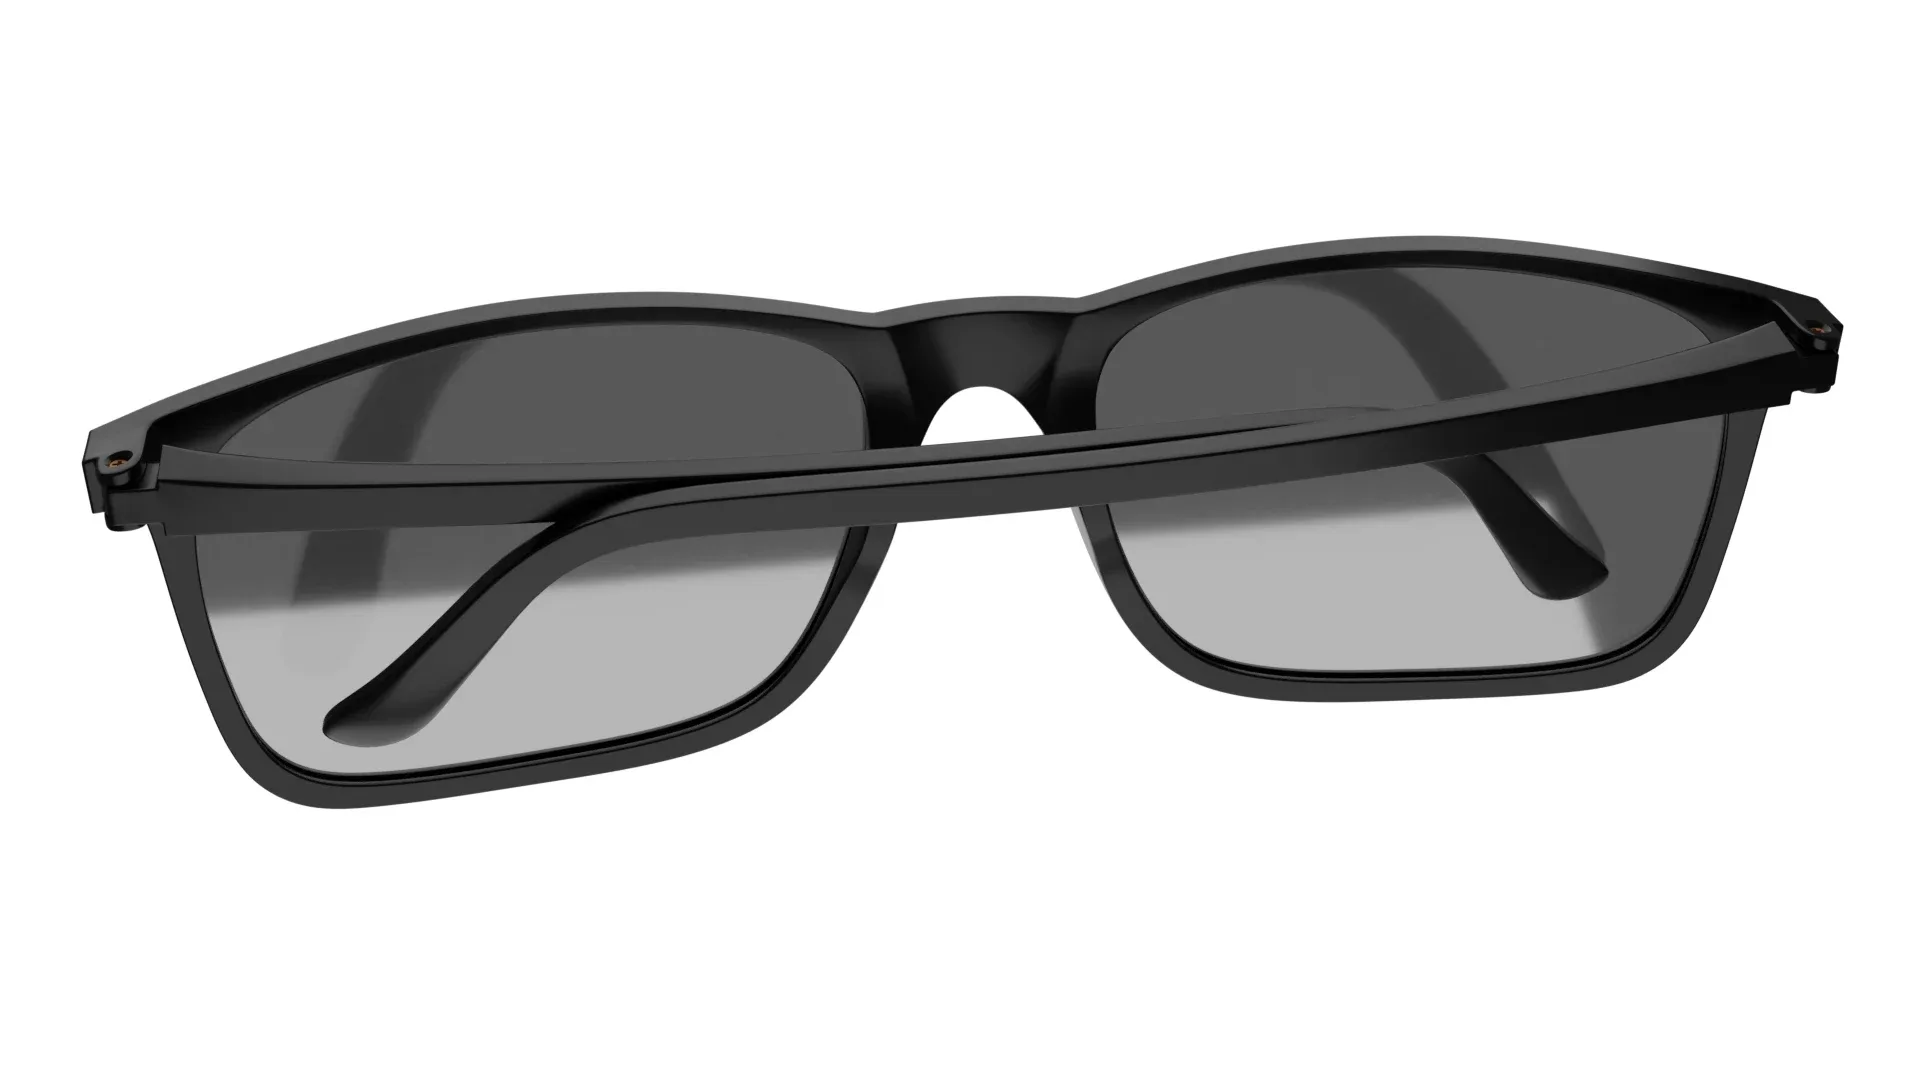 Have A Look Reading Glasses - Type A - Black